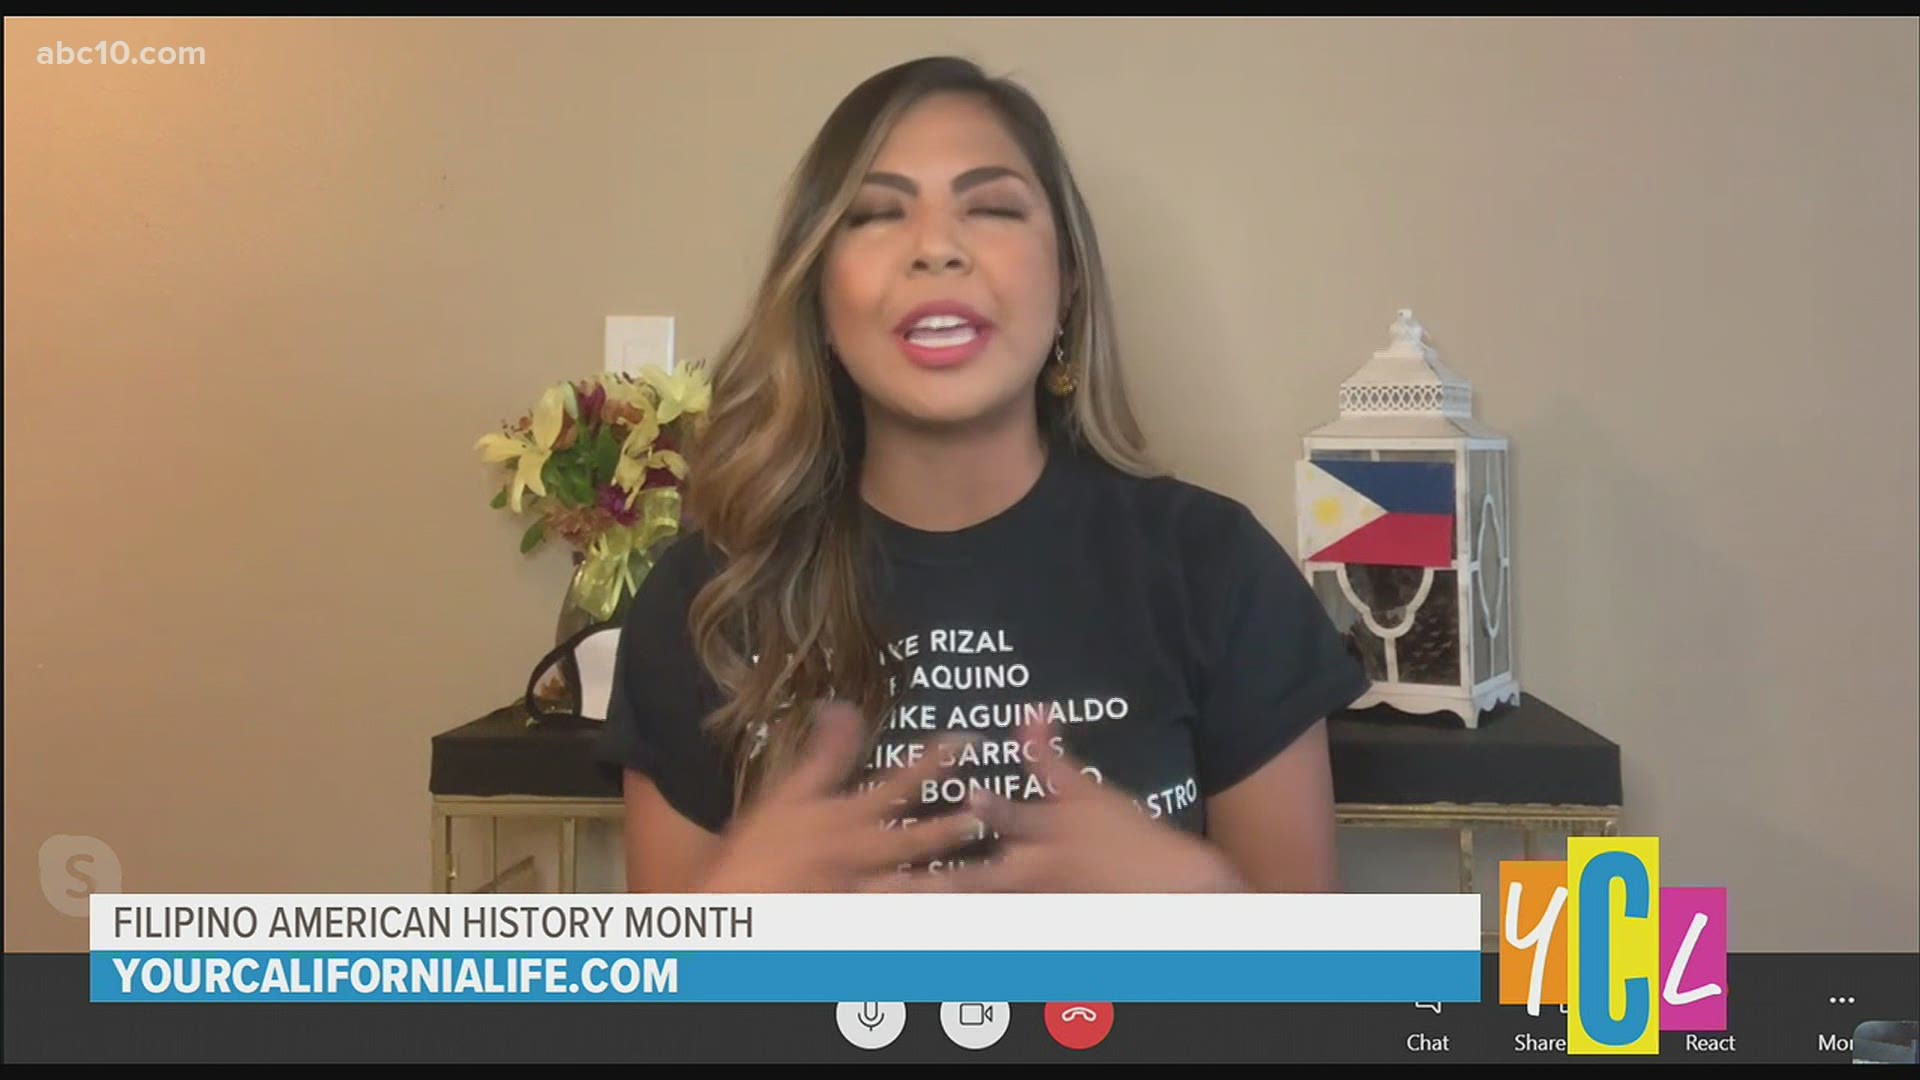 Philippine National Day Association President Rosie Dauz shares little known Filipino American history facts and what is means to be Filipino American.